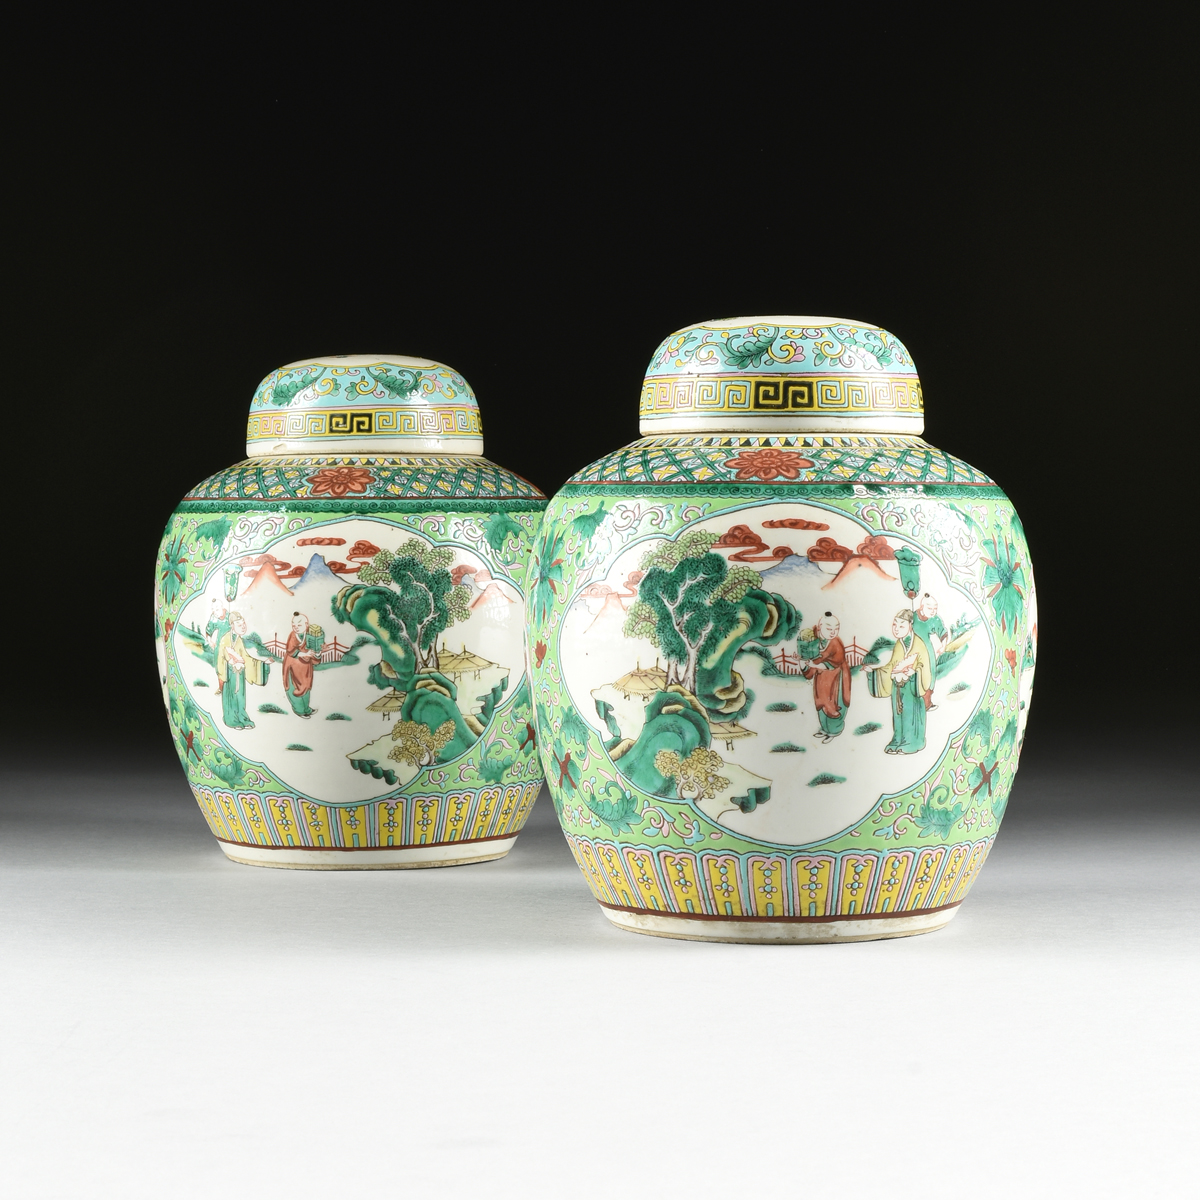 A PAIR OF CHINESE "FAMILLE VERTE" PORCELAIN GINGER JARS WITH LIDS, REPUBLIC PERIOD CIRCA 1917- - Image 2 of 14